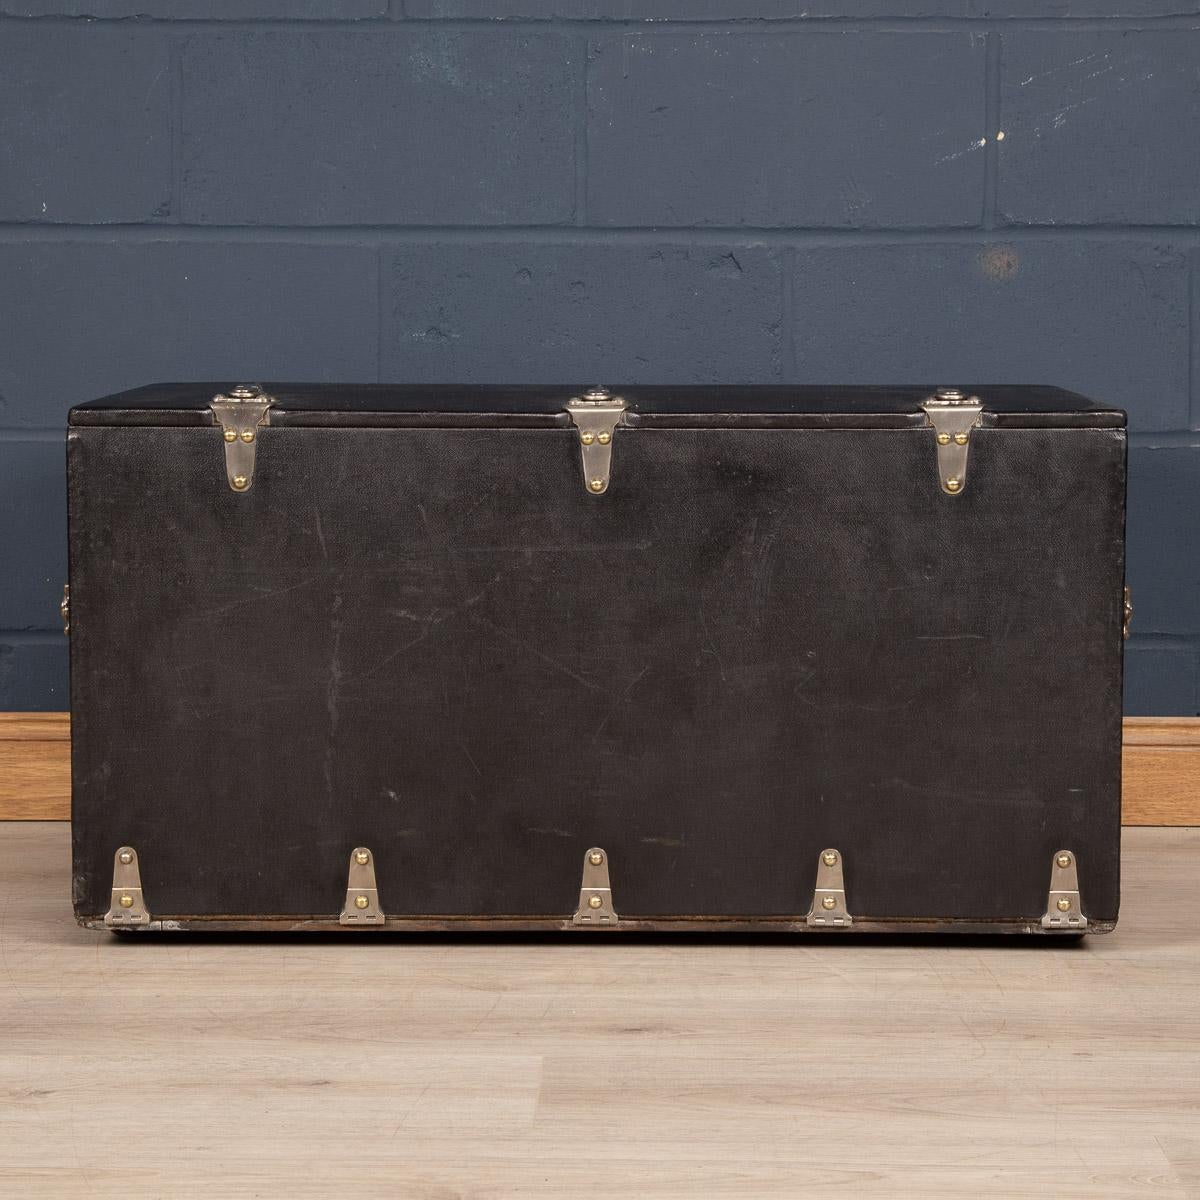 Antique 20th century large and very rare Louis Vuitton car trunk covered in black Vuittonite canvas. Car trunks were usually bespoke made for the owner’s car and would ordinarily be positioned inside the boot of the vehicle or strapped to the back